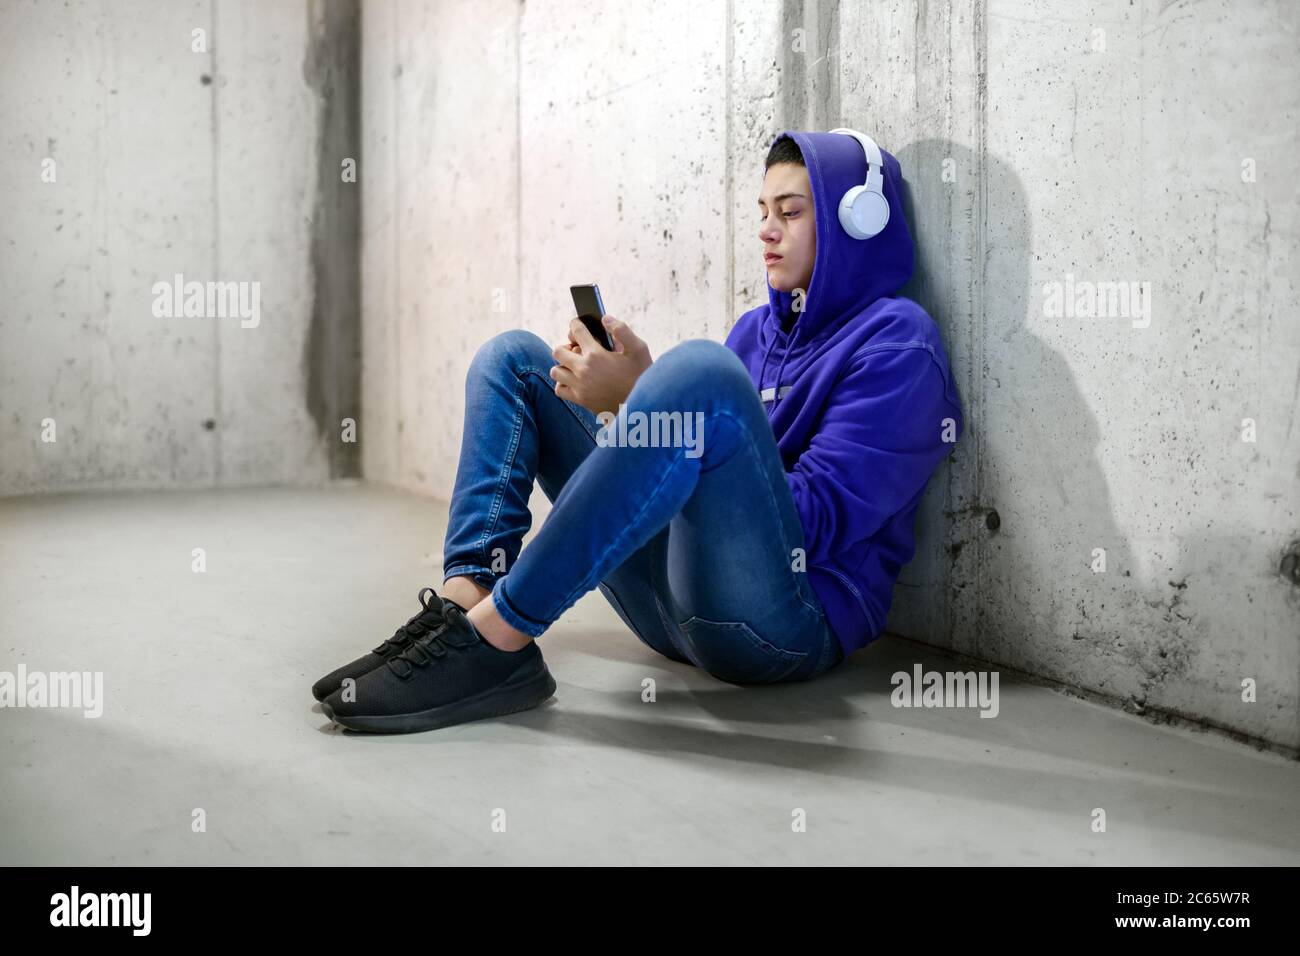 Young teenage boy wearing headphones chatting on his mobile phone as he sits on the concrete floor in a subway or corridor in a blue hoodie and jeans Stock Photo